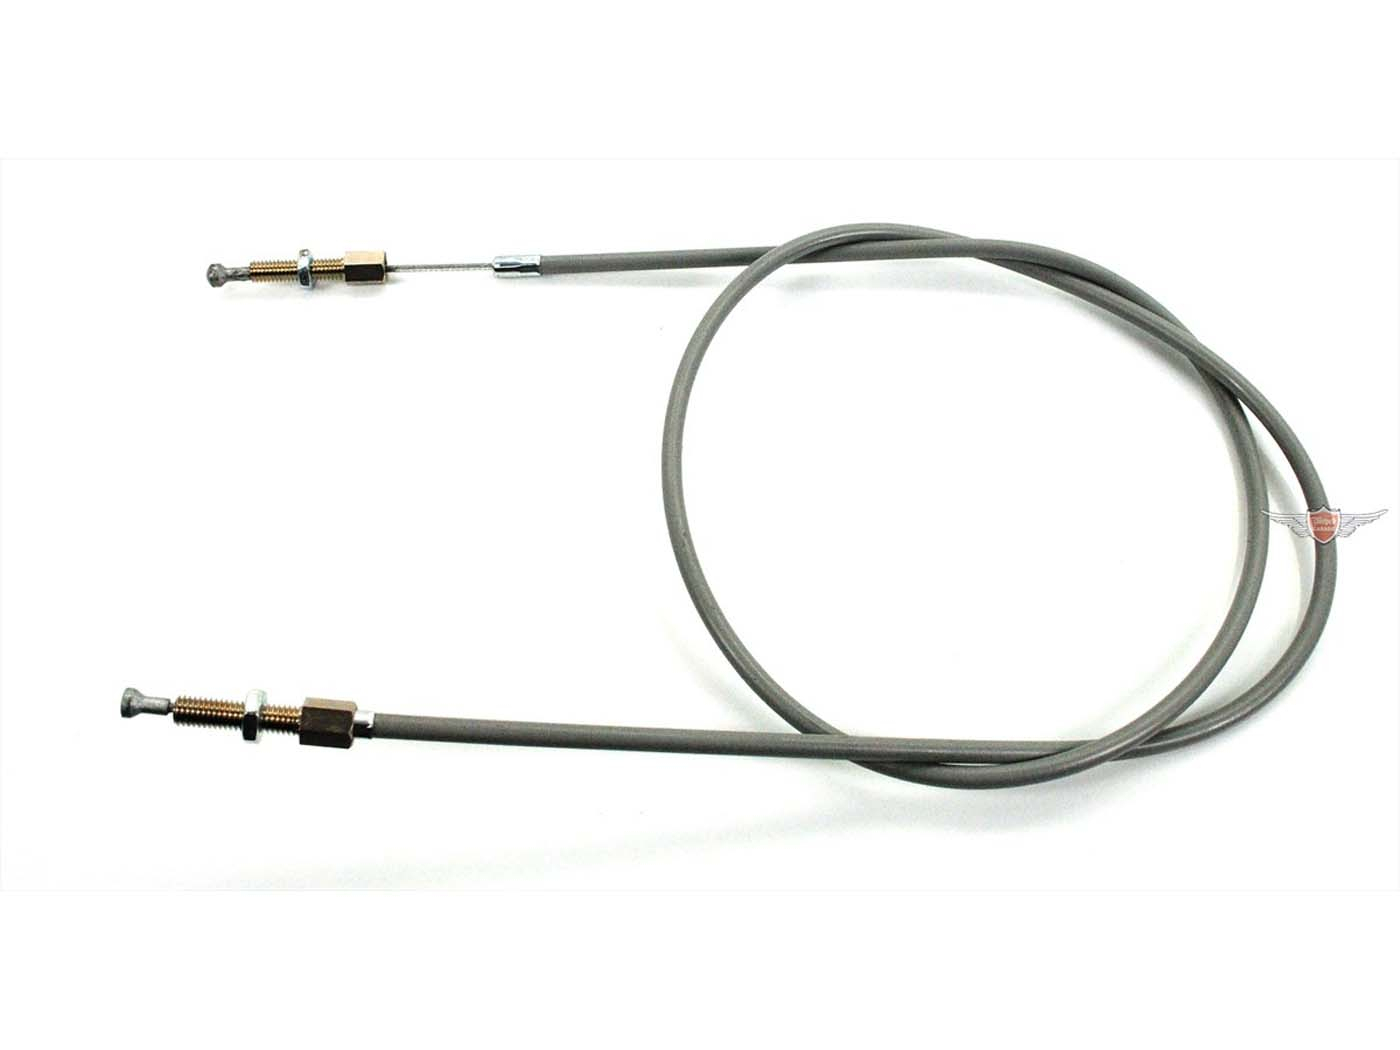 Brake Cable Bowden Cable For Sachs Saxy Moped